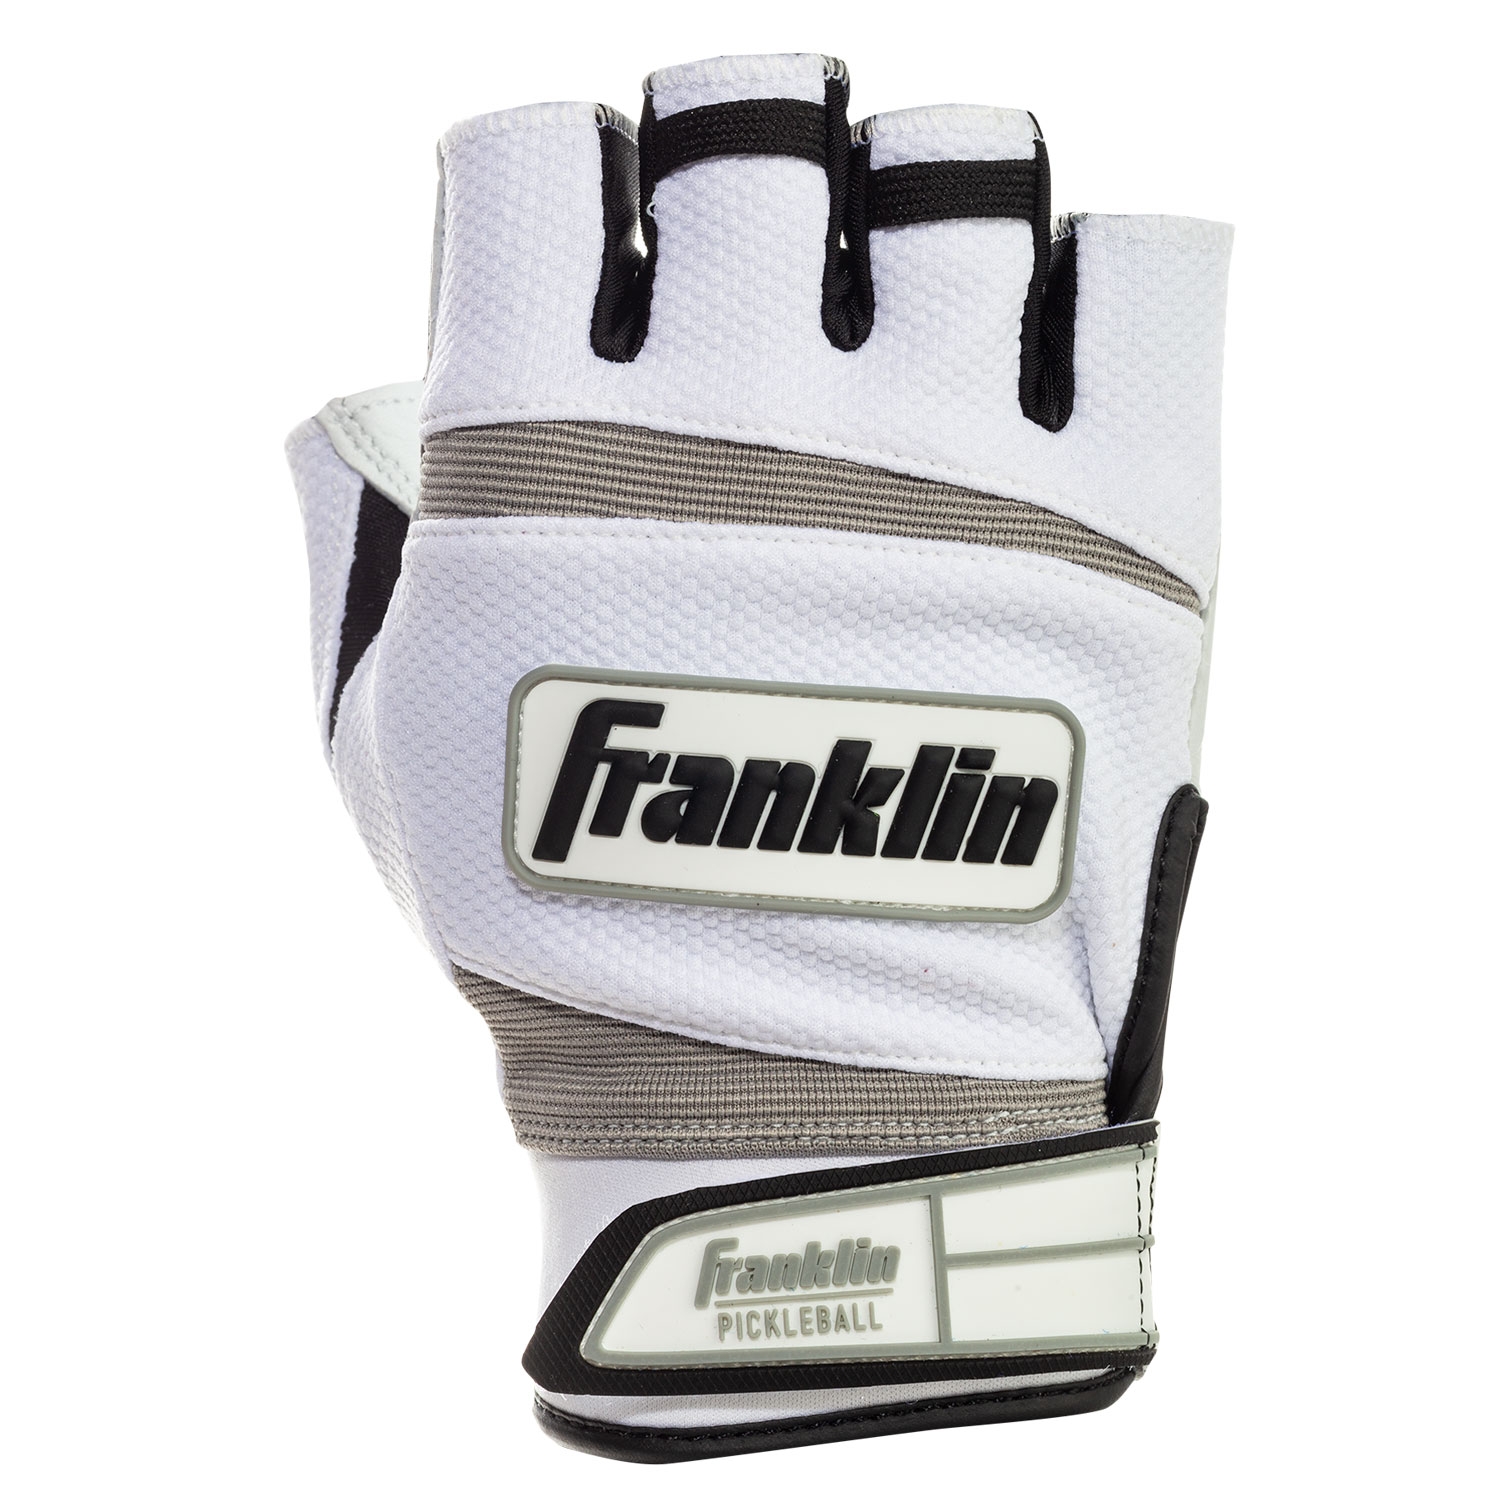 Quality Sports Flex Pickleball Glove Ultimate Performance Leather Palm Breathable Glove Right or Left Hand